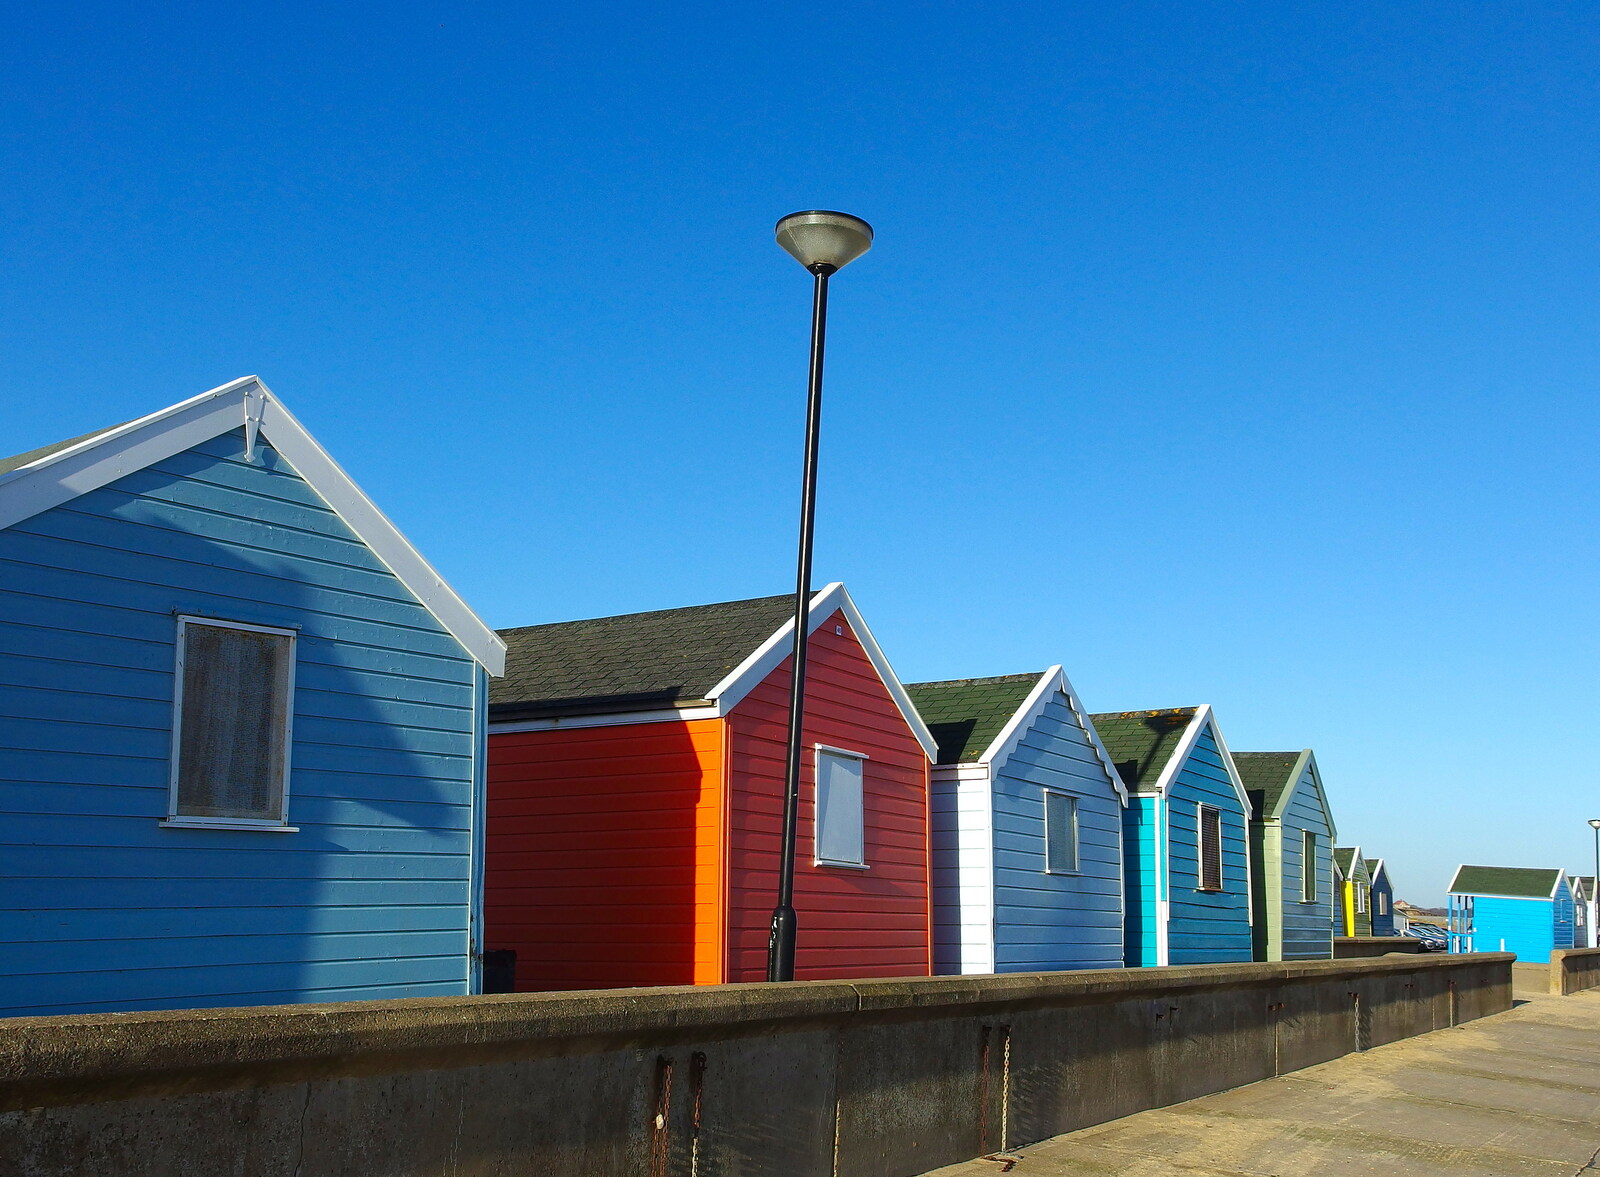 Colourful beach huts on the prom from Post-Christmas Southwold, Suffolk - 29th December 2013